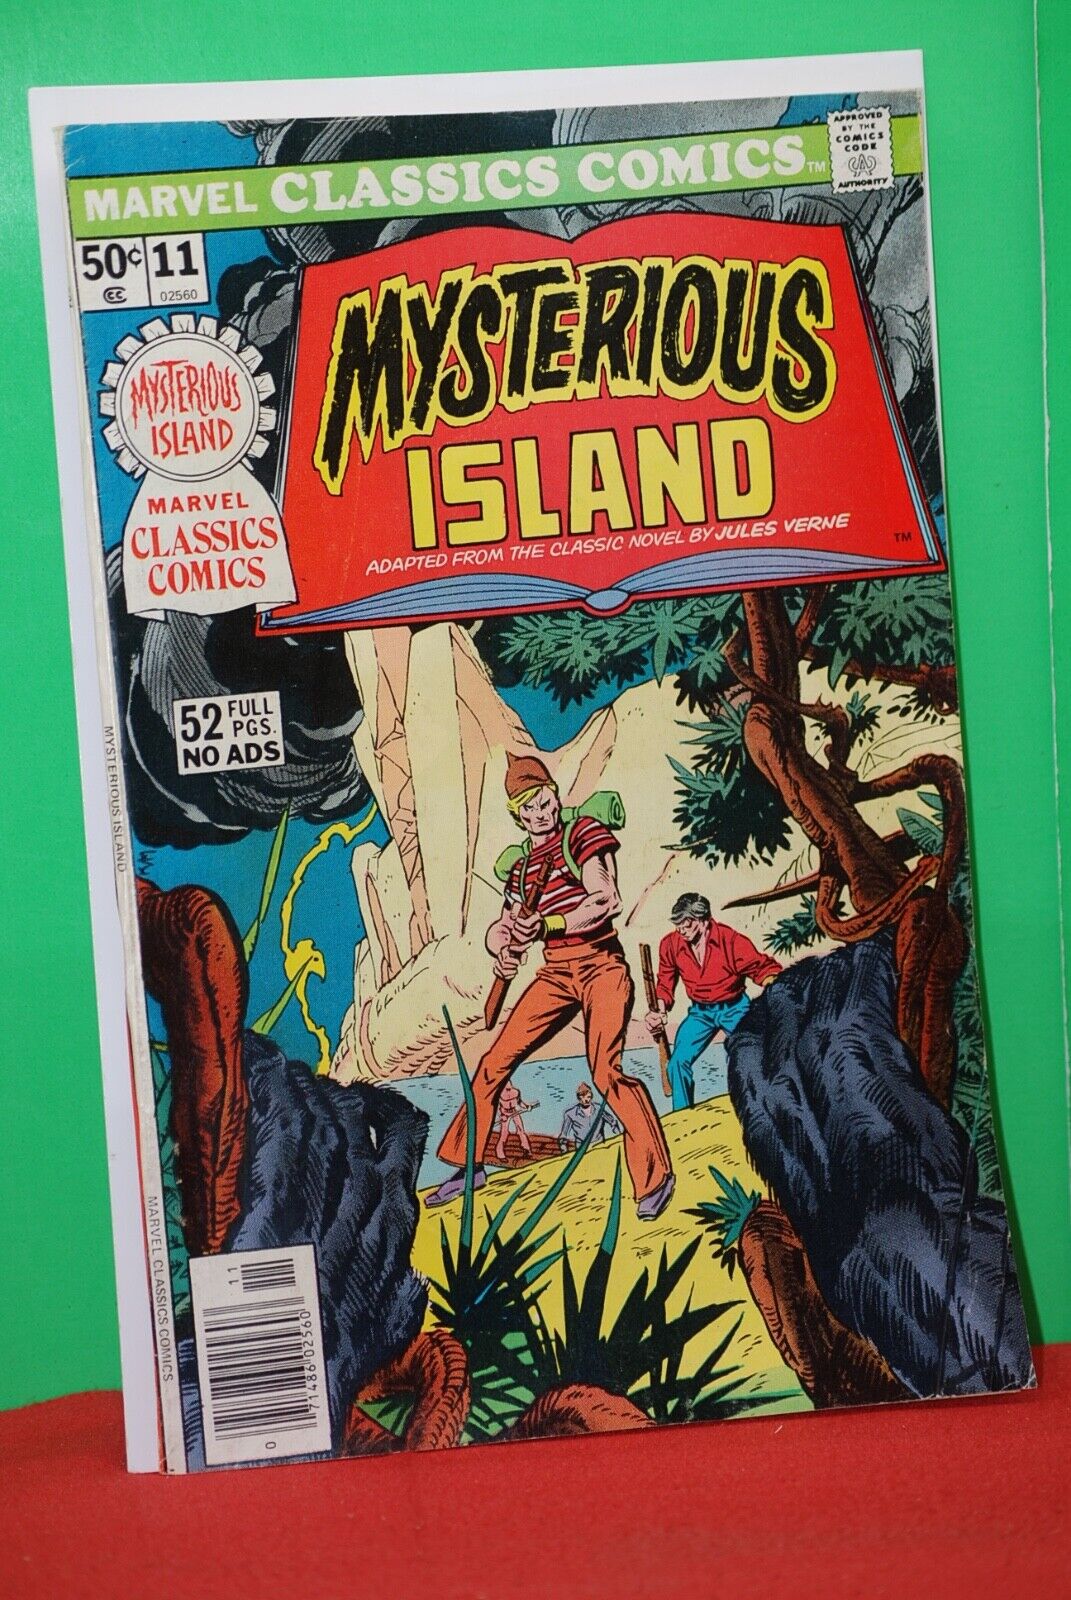 MARVEL CLASSICS COMICS #11  VF  1976 MYSTERIOUS ISLAND by JULES VERNE BRONZE